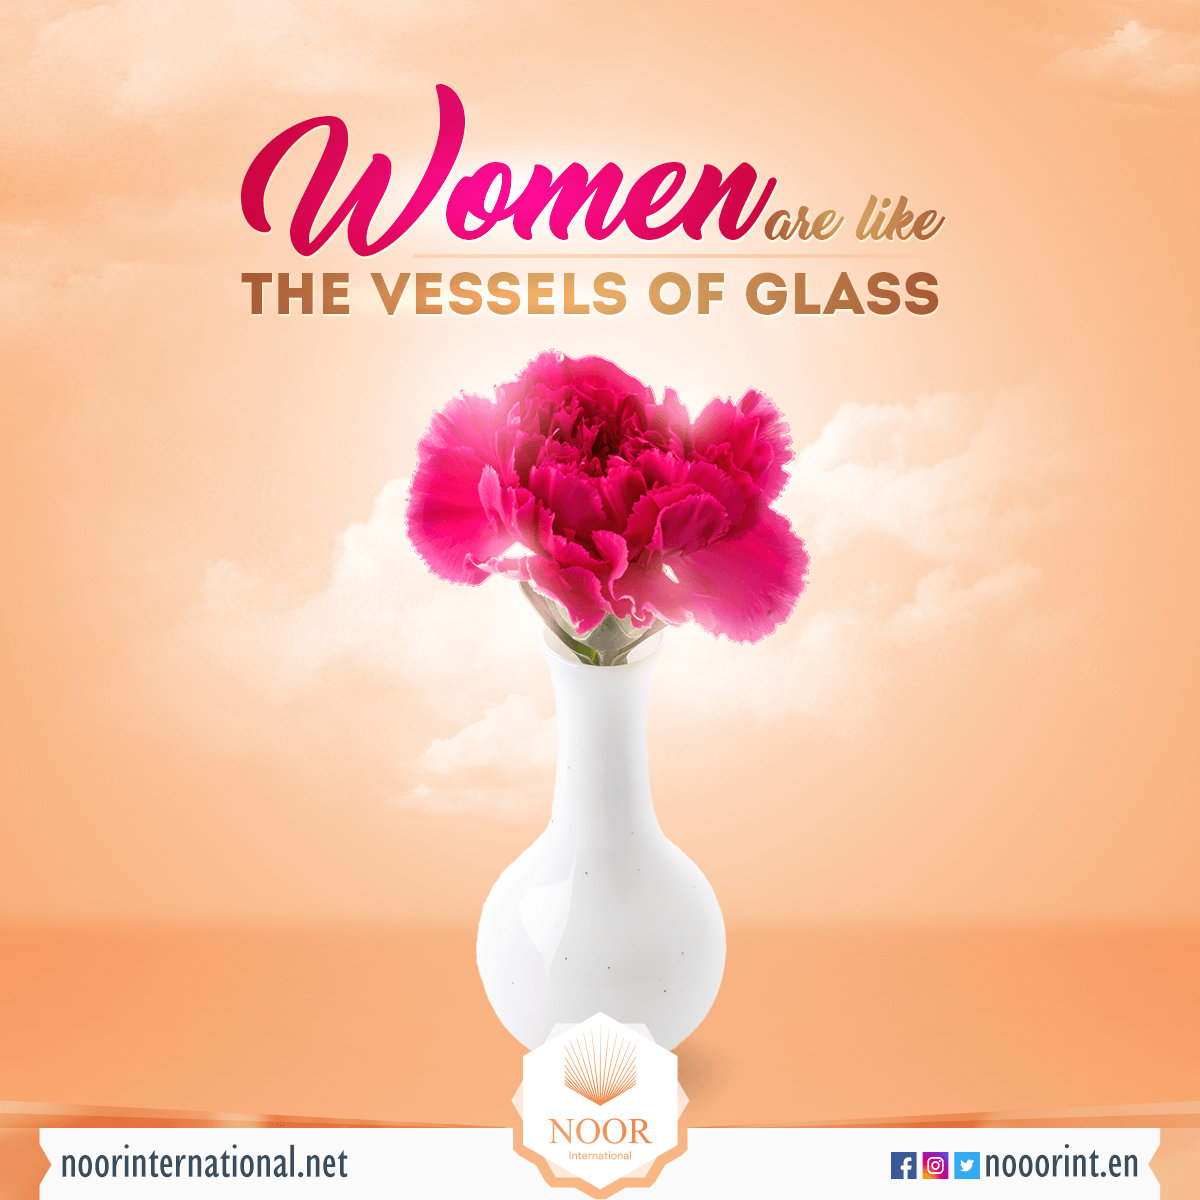 Women are like the vessels of glass